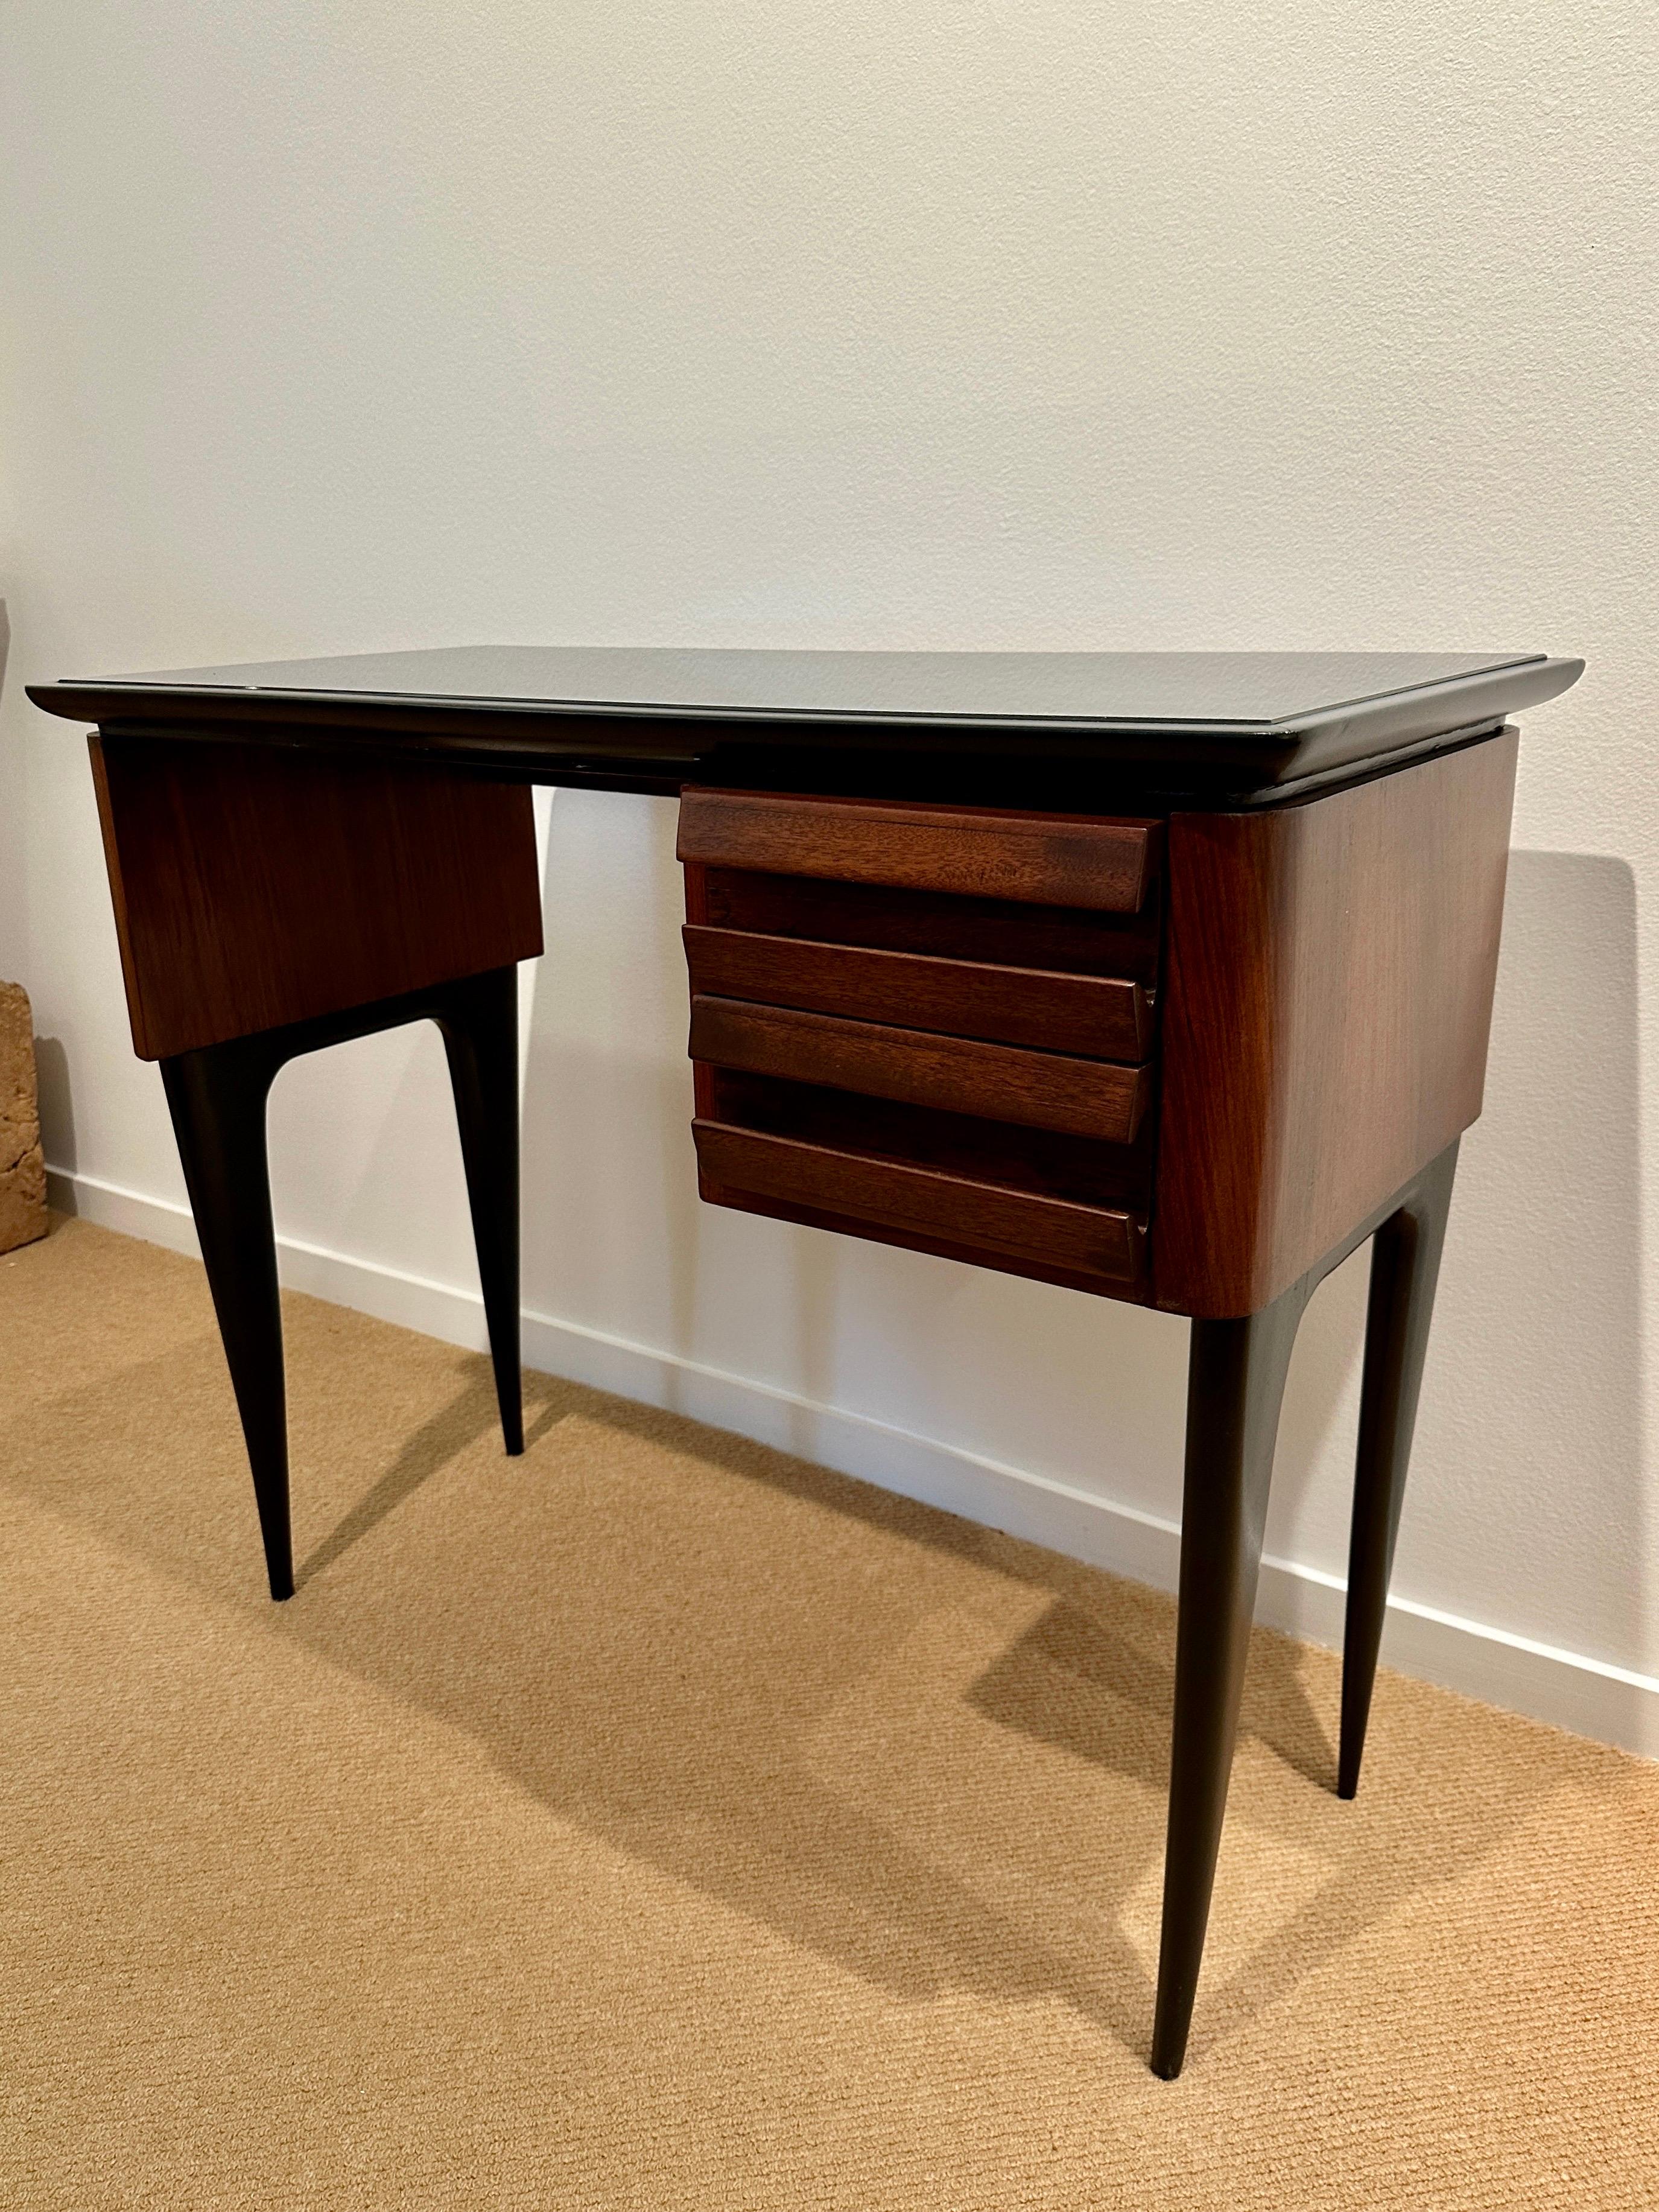 This very sweet writing desk with black glass plateau and two tone walnut and wood frame. Two small drawers.  THIS ITEM IS LOCATED AND WILL SHIP FROM OUR EAST HAMPTON, NY SHOWROOM.